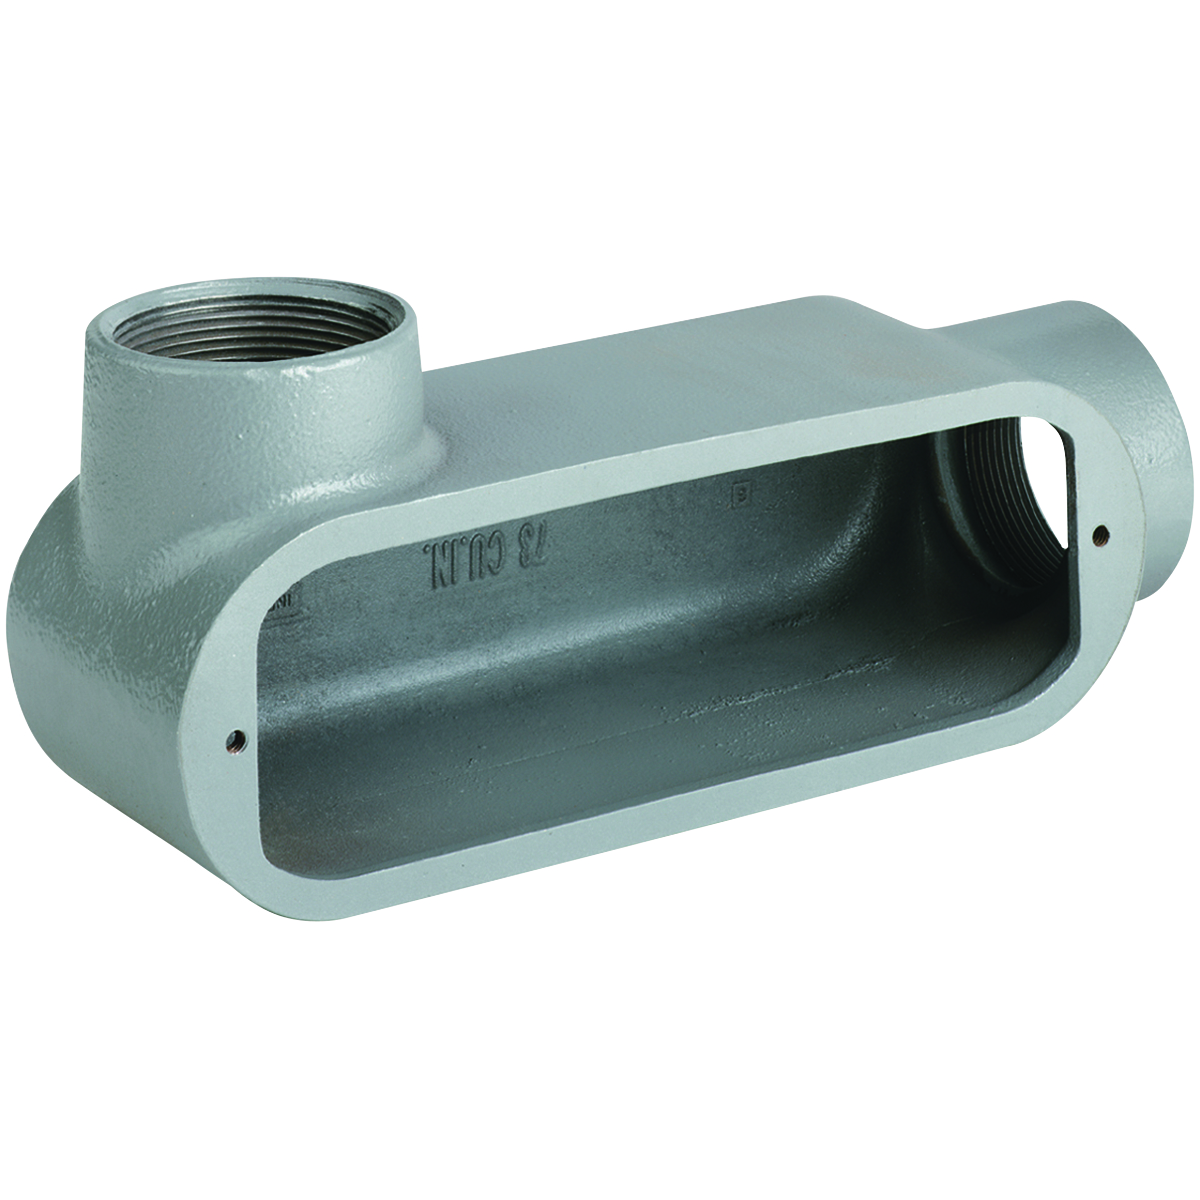 O SERIES/DURALOY 5 SERIES - MALLEABLE IRON CONDUIT BODY - LL TYPE - HUBSIZE 2-1/2 INCH - VOLUME 142.0 CUBIC INCHES